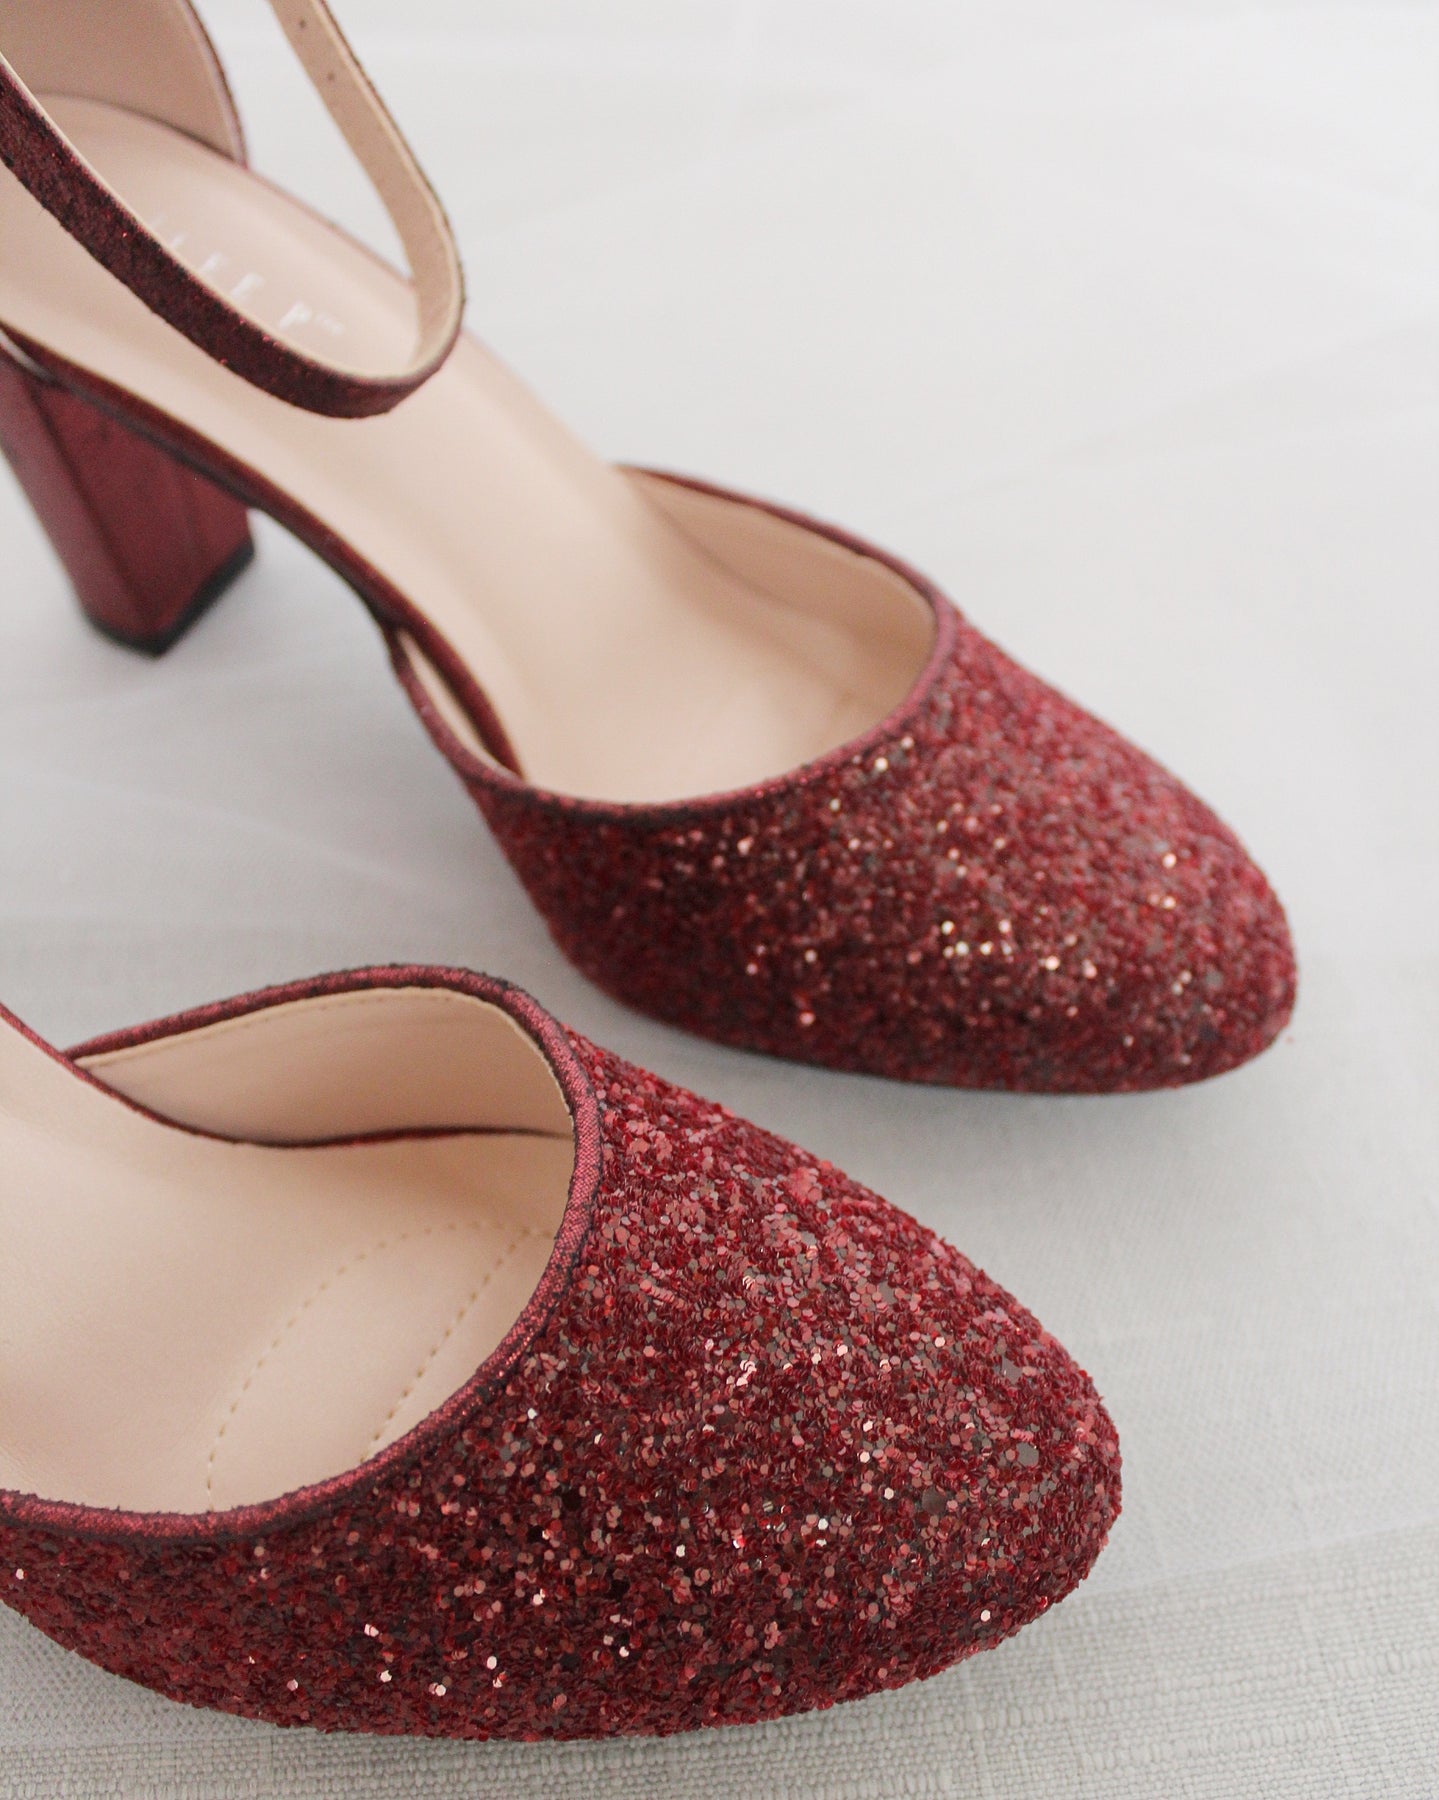 Red Glitter Heels, Red Court Heels, Red Glitter Shoes, Custom Glitter Heels, Womens Glitter Shoes, Red Bridal Shoes, Ruby Red Heels, Dorothy